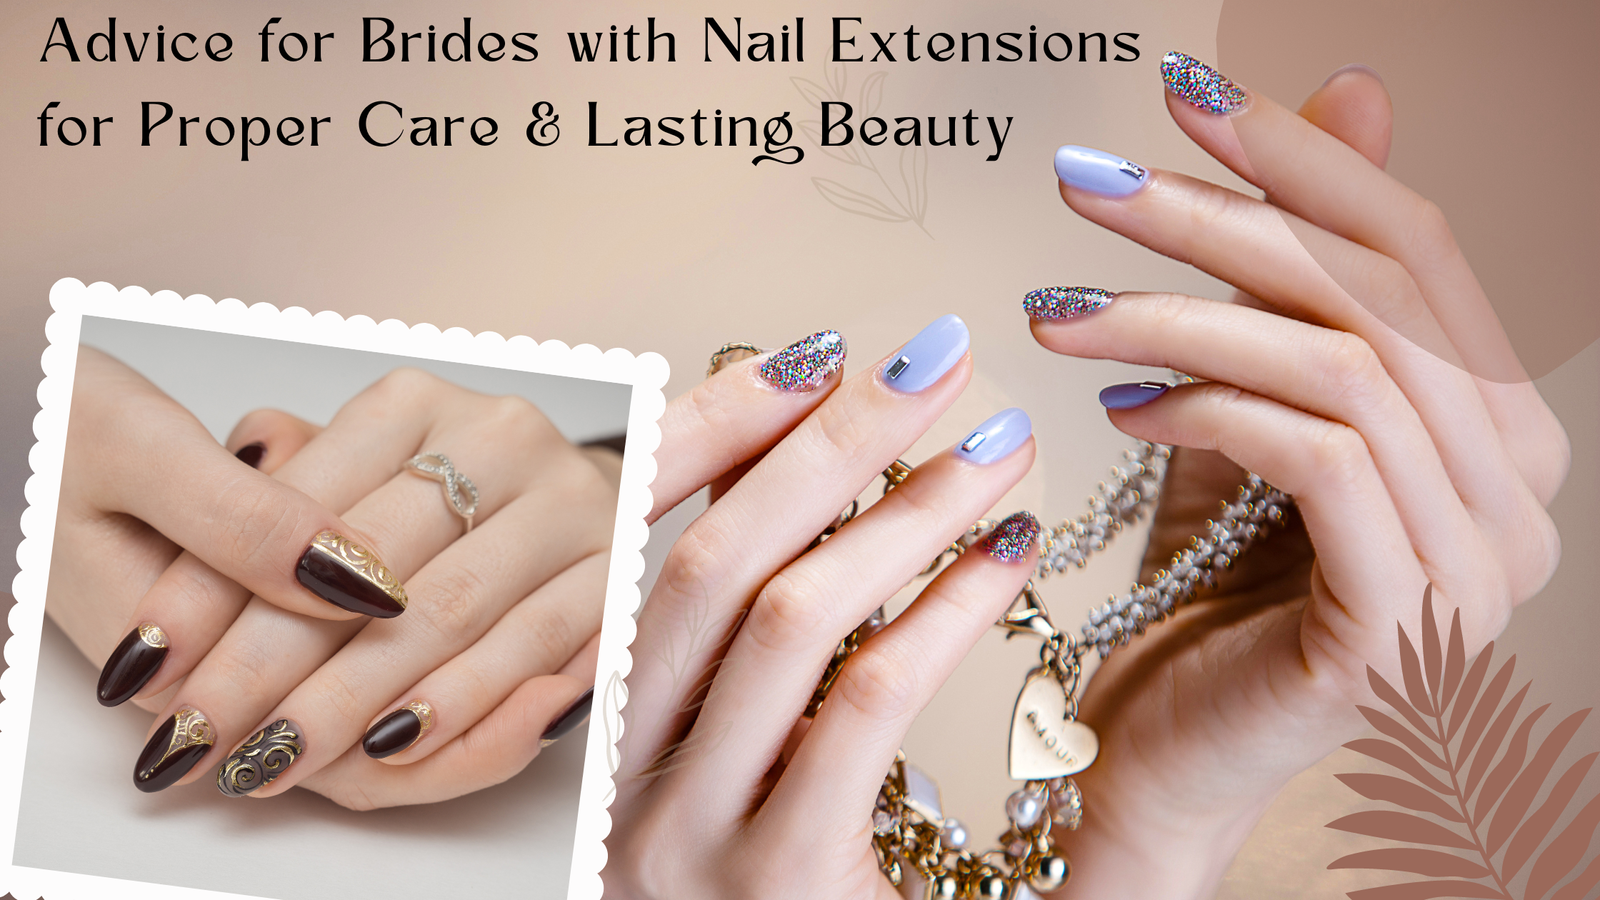 Advice for Brides with Nail Extensions for Proper Care & Lasting Beauty